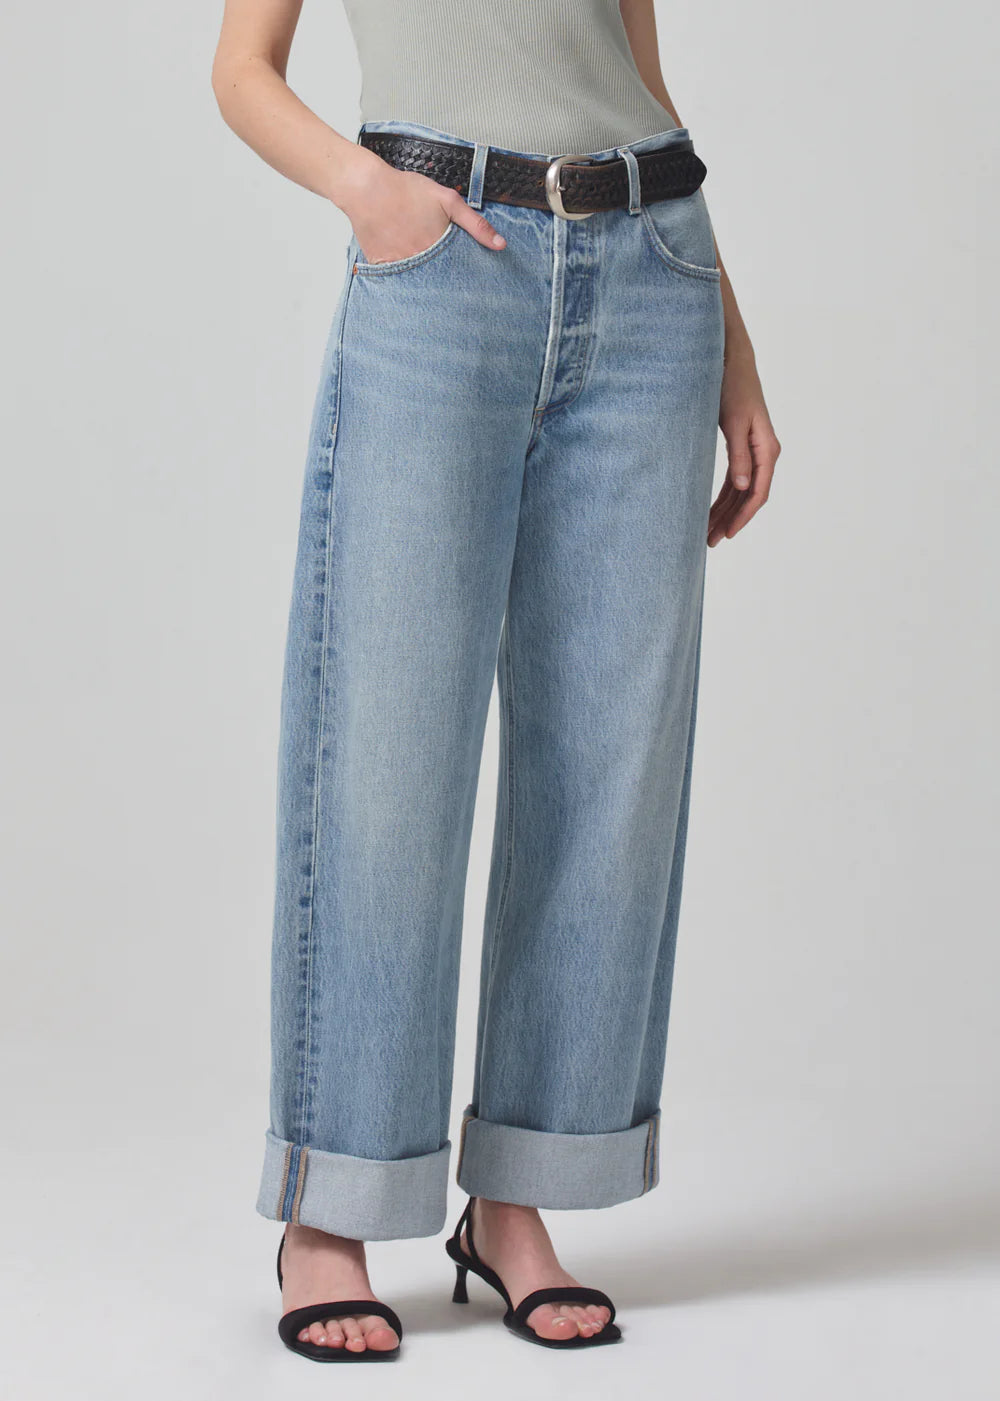 AYLA BAGGY CUFFED CROP - SKYLIGHTS - CITIZENS OF HUMANITY